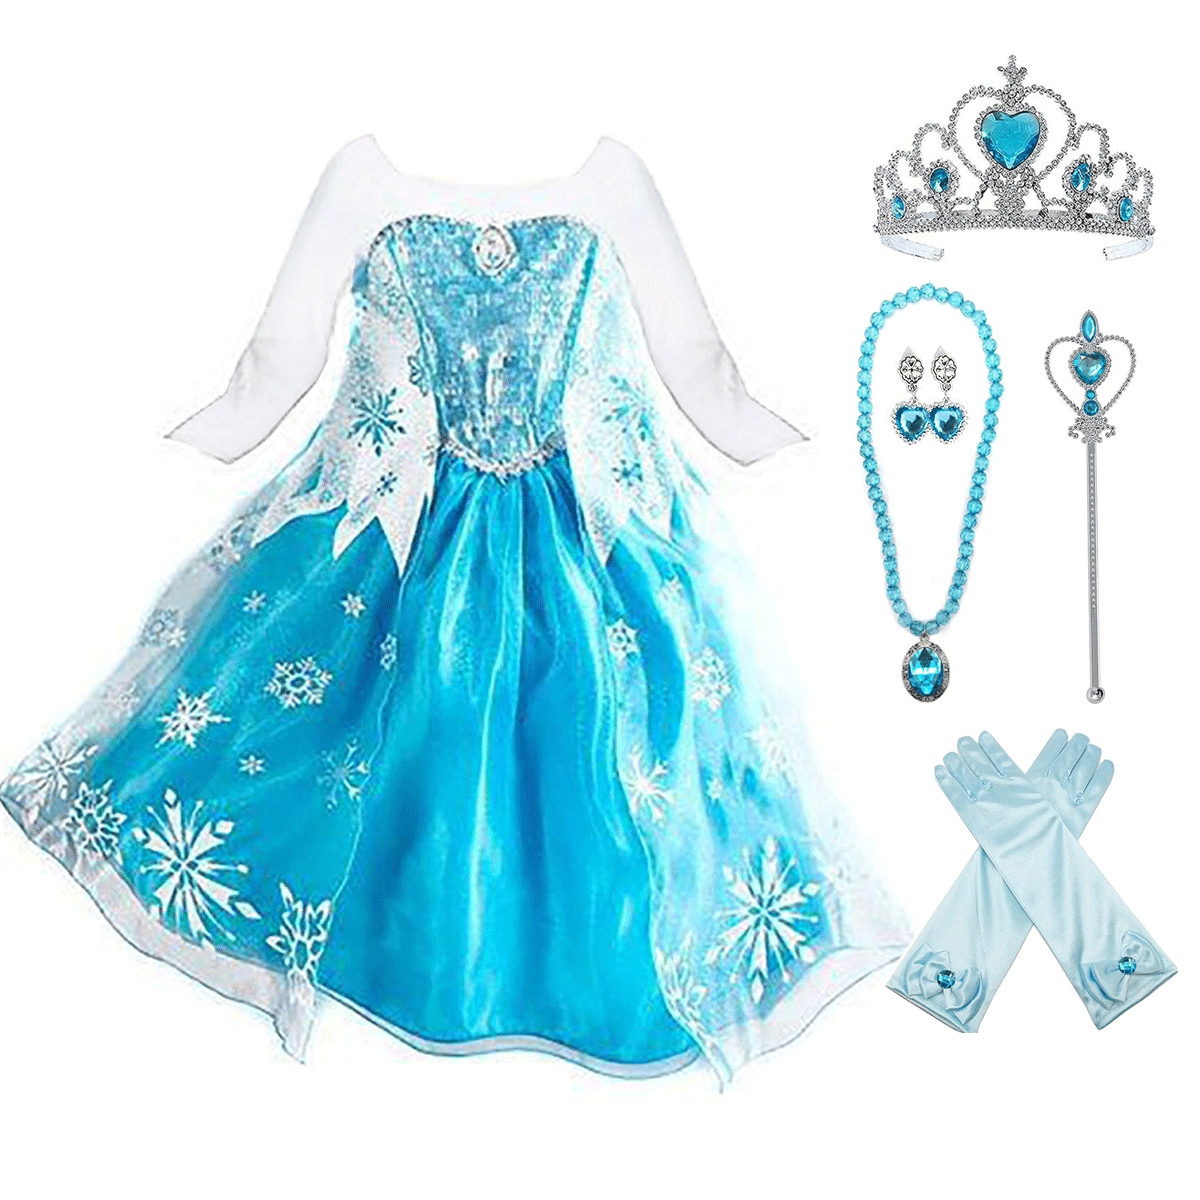 8 Frozen Elsa and Anna Masks Birthday Dress-up Party Game Supplies Decoration